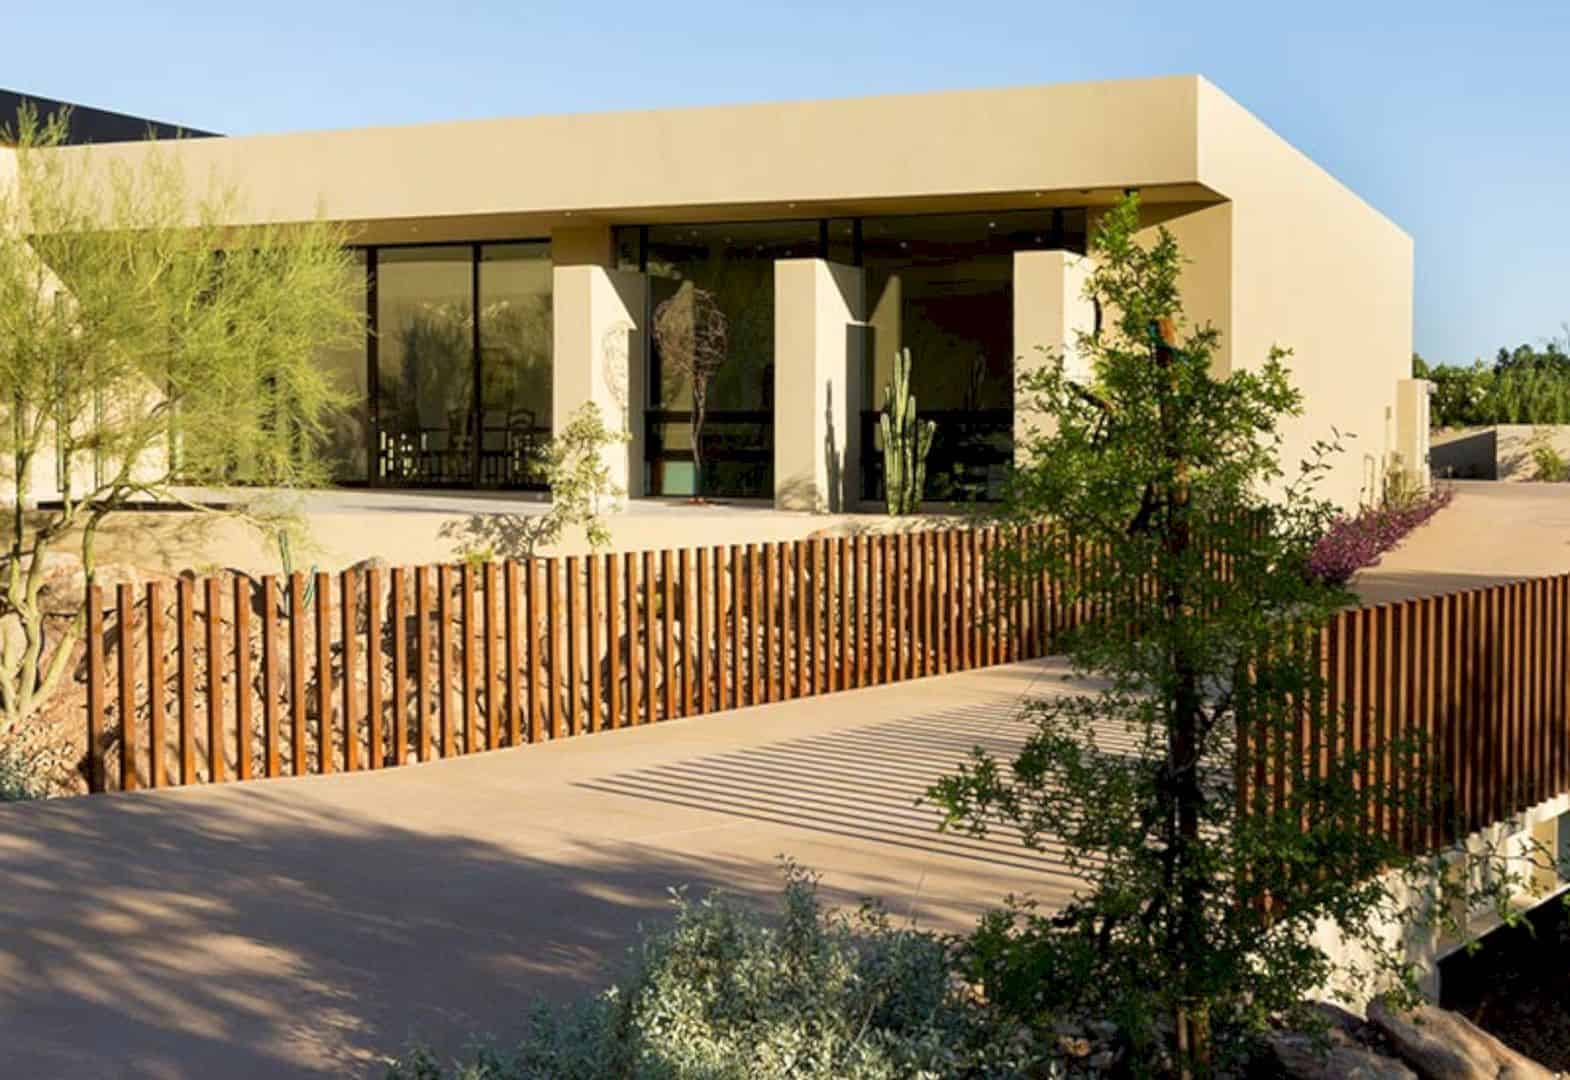 Desert Wash Residence A Modern Desert Home Defining Paradise Valleys Topographical Feature 2